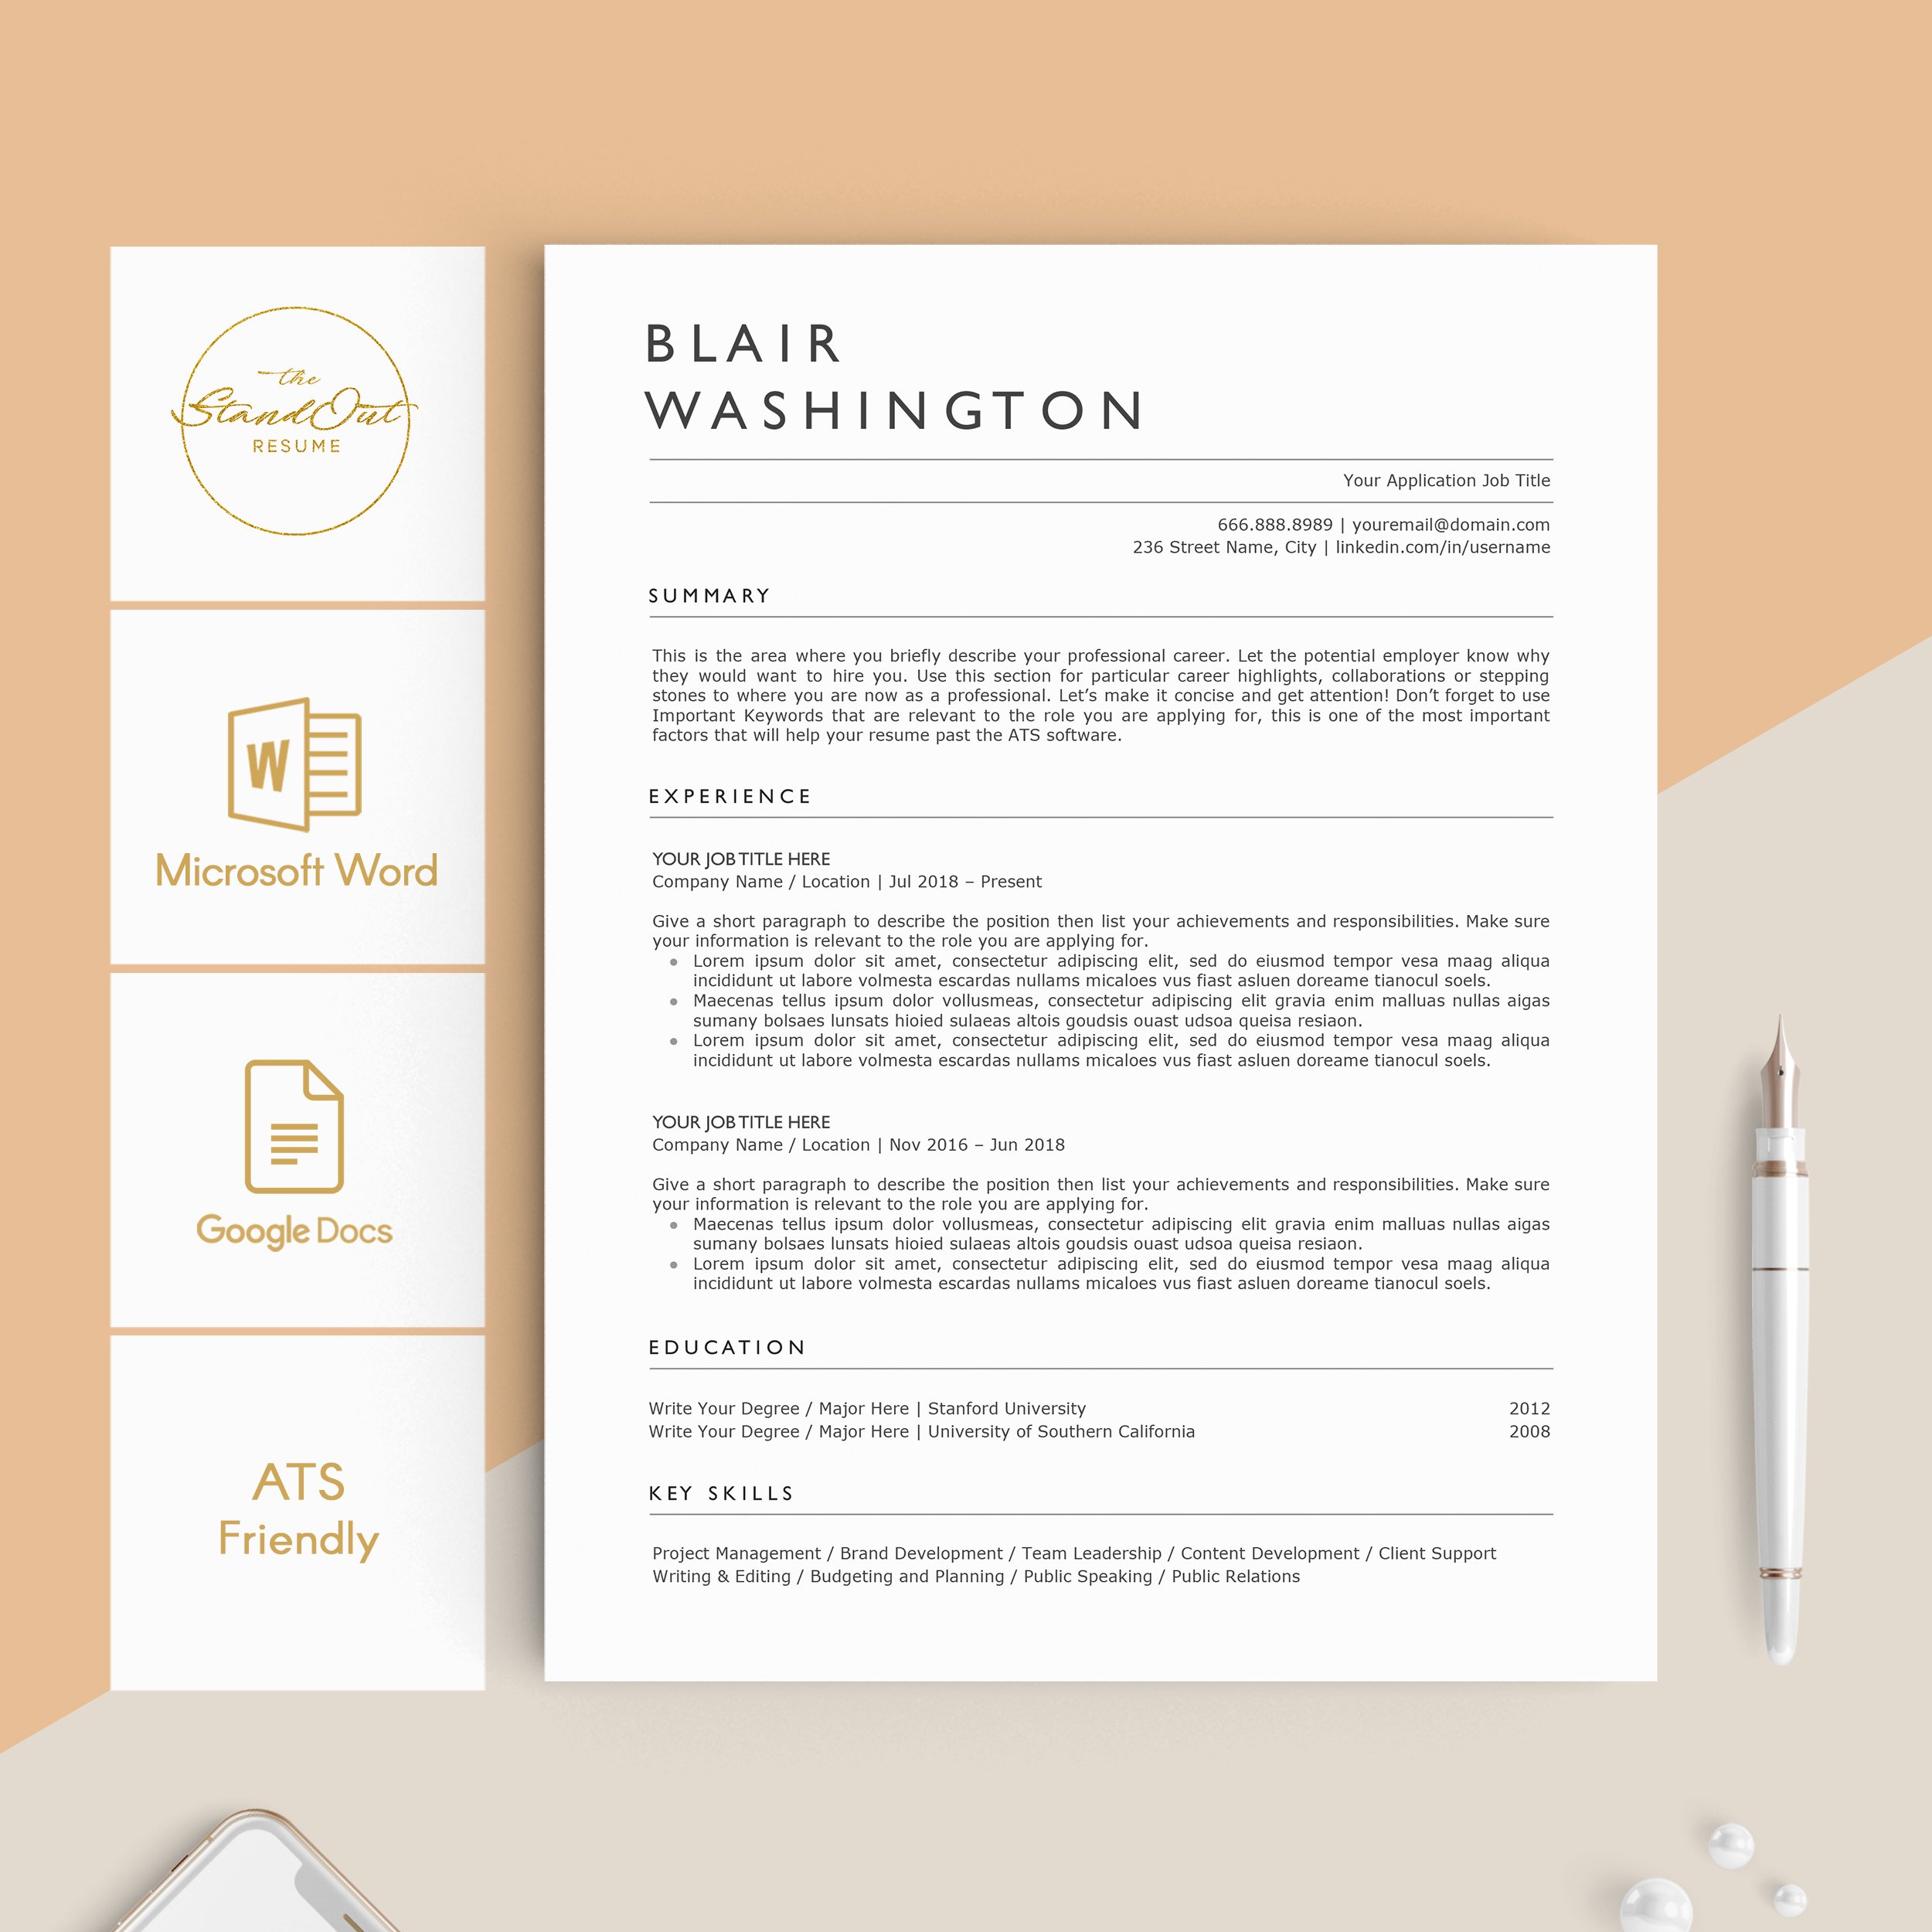 ATS Resume Template - BLAIR preview image.